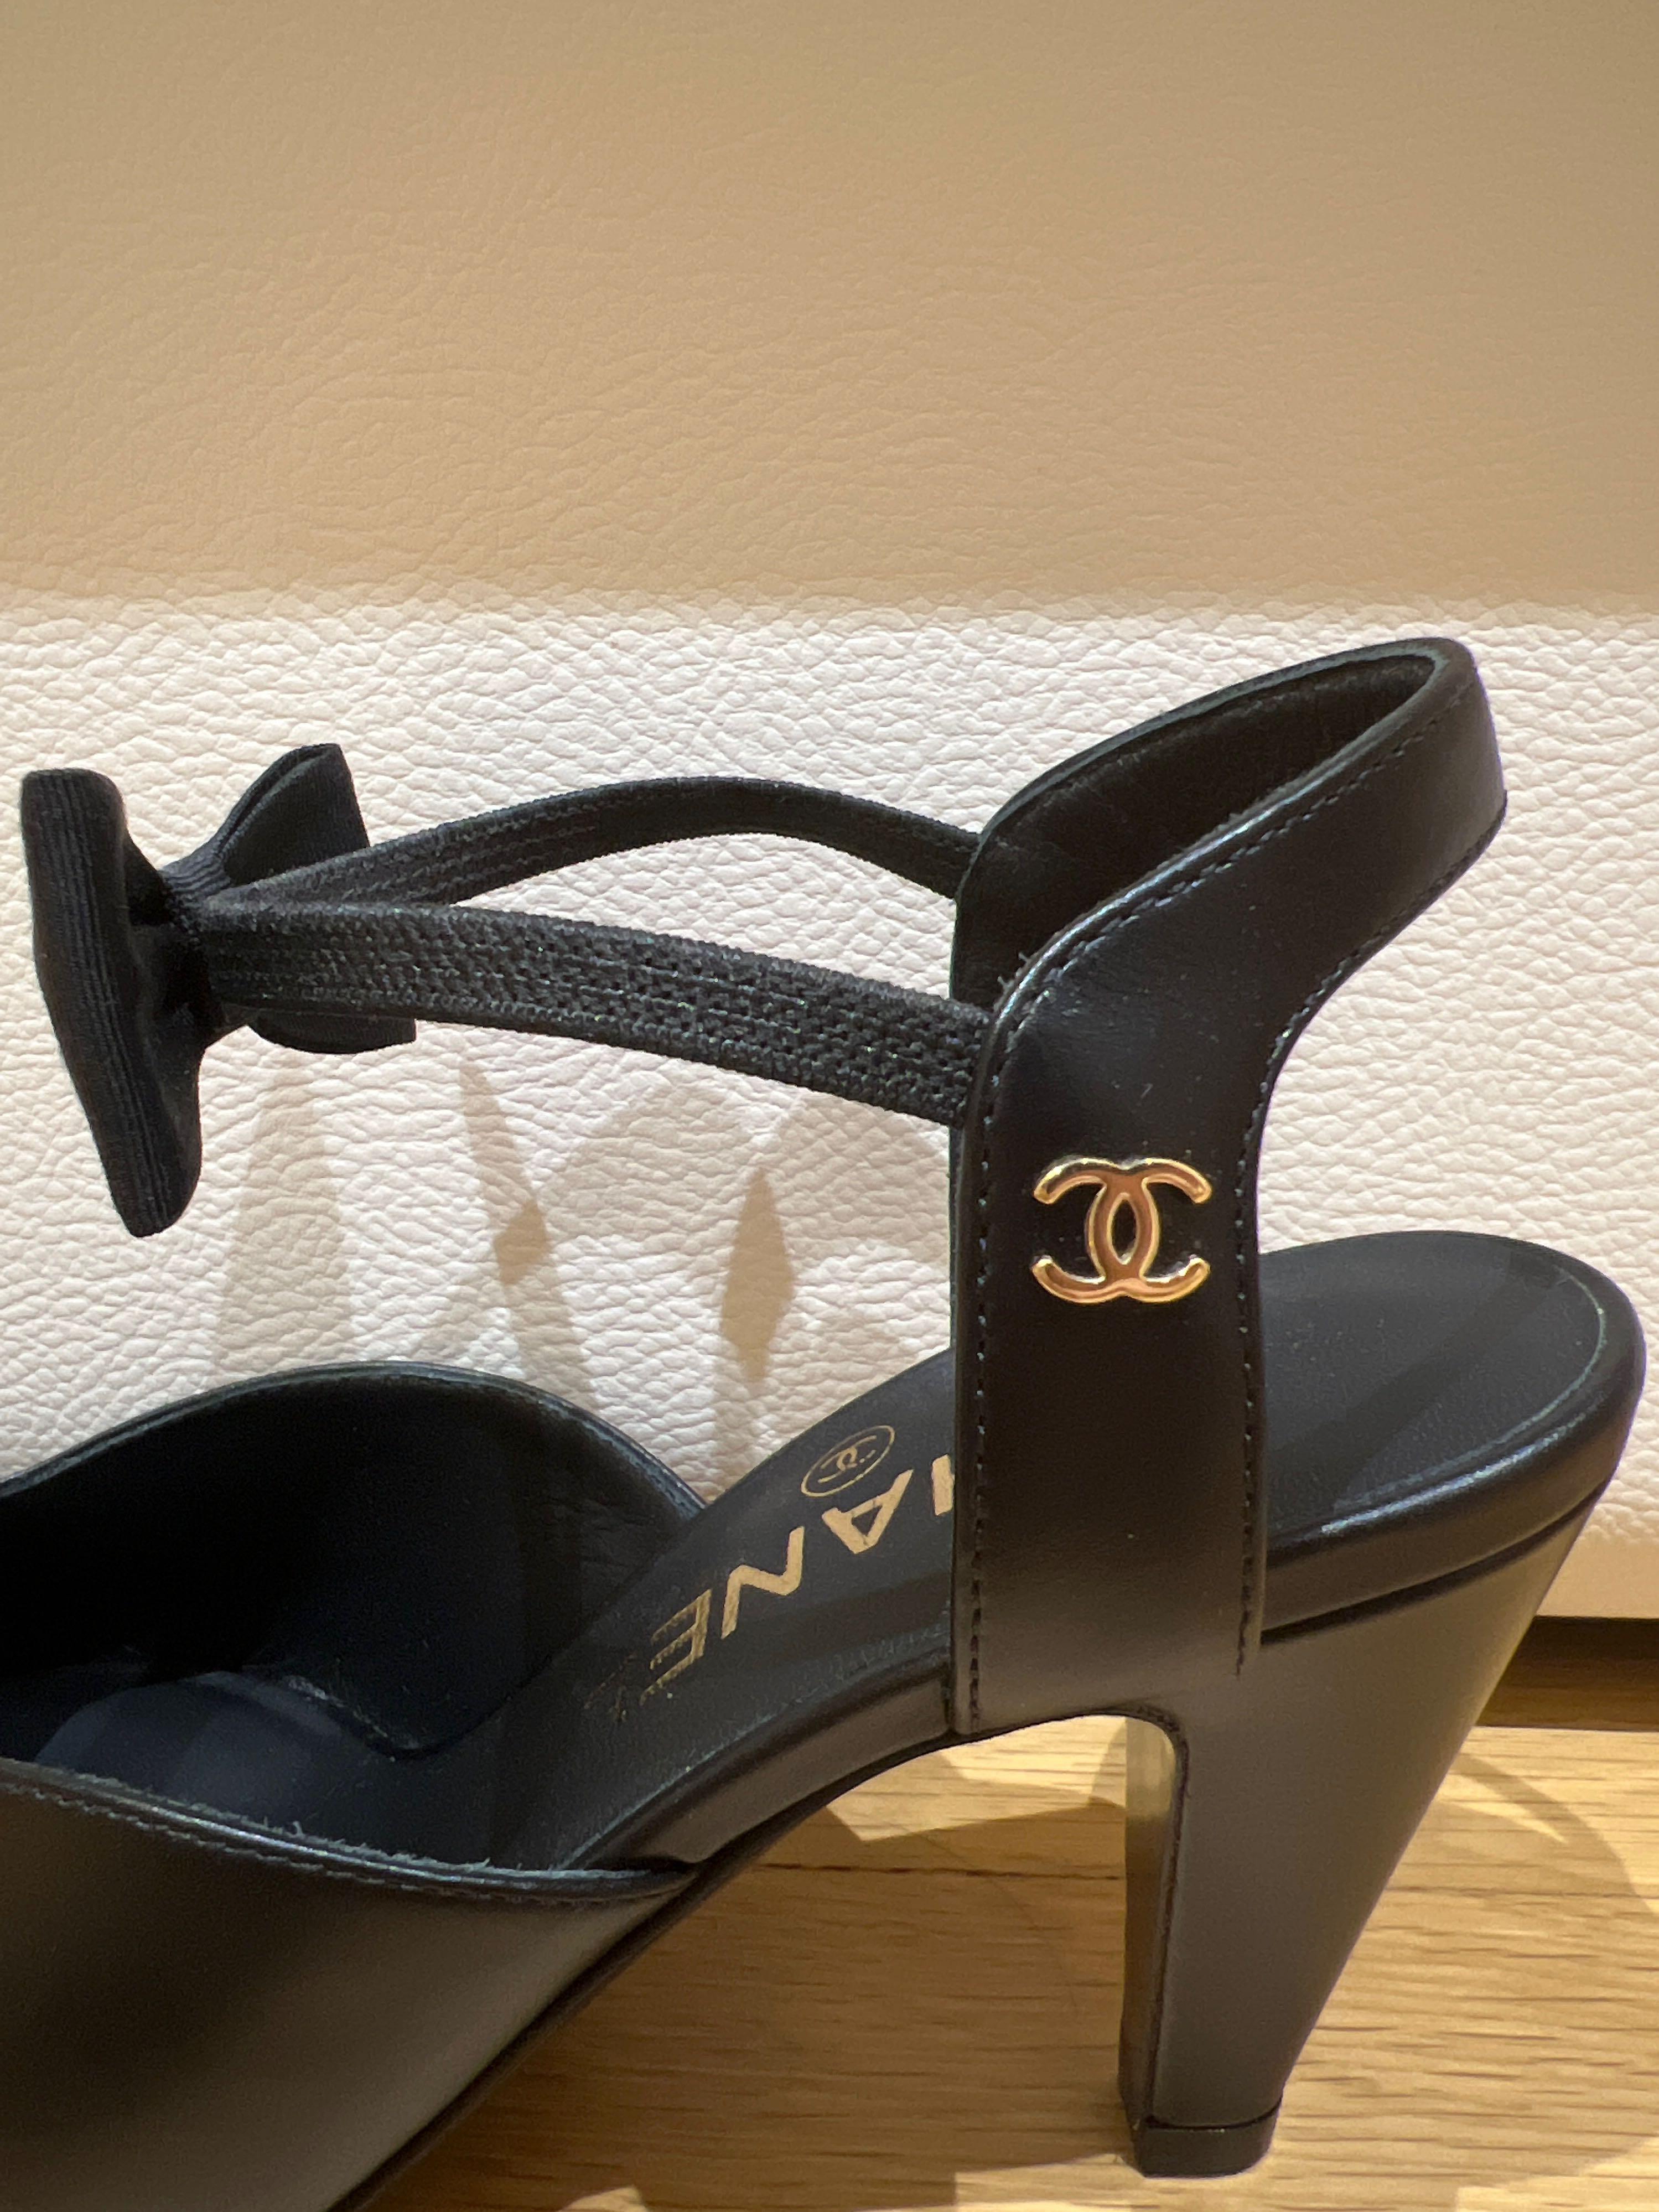 CHANEL LEATHER BOW HEELS 2022 spring summer Collection Size 36 4 Heel   eBay